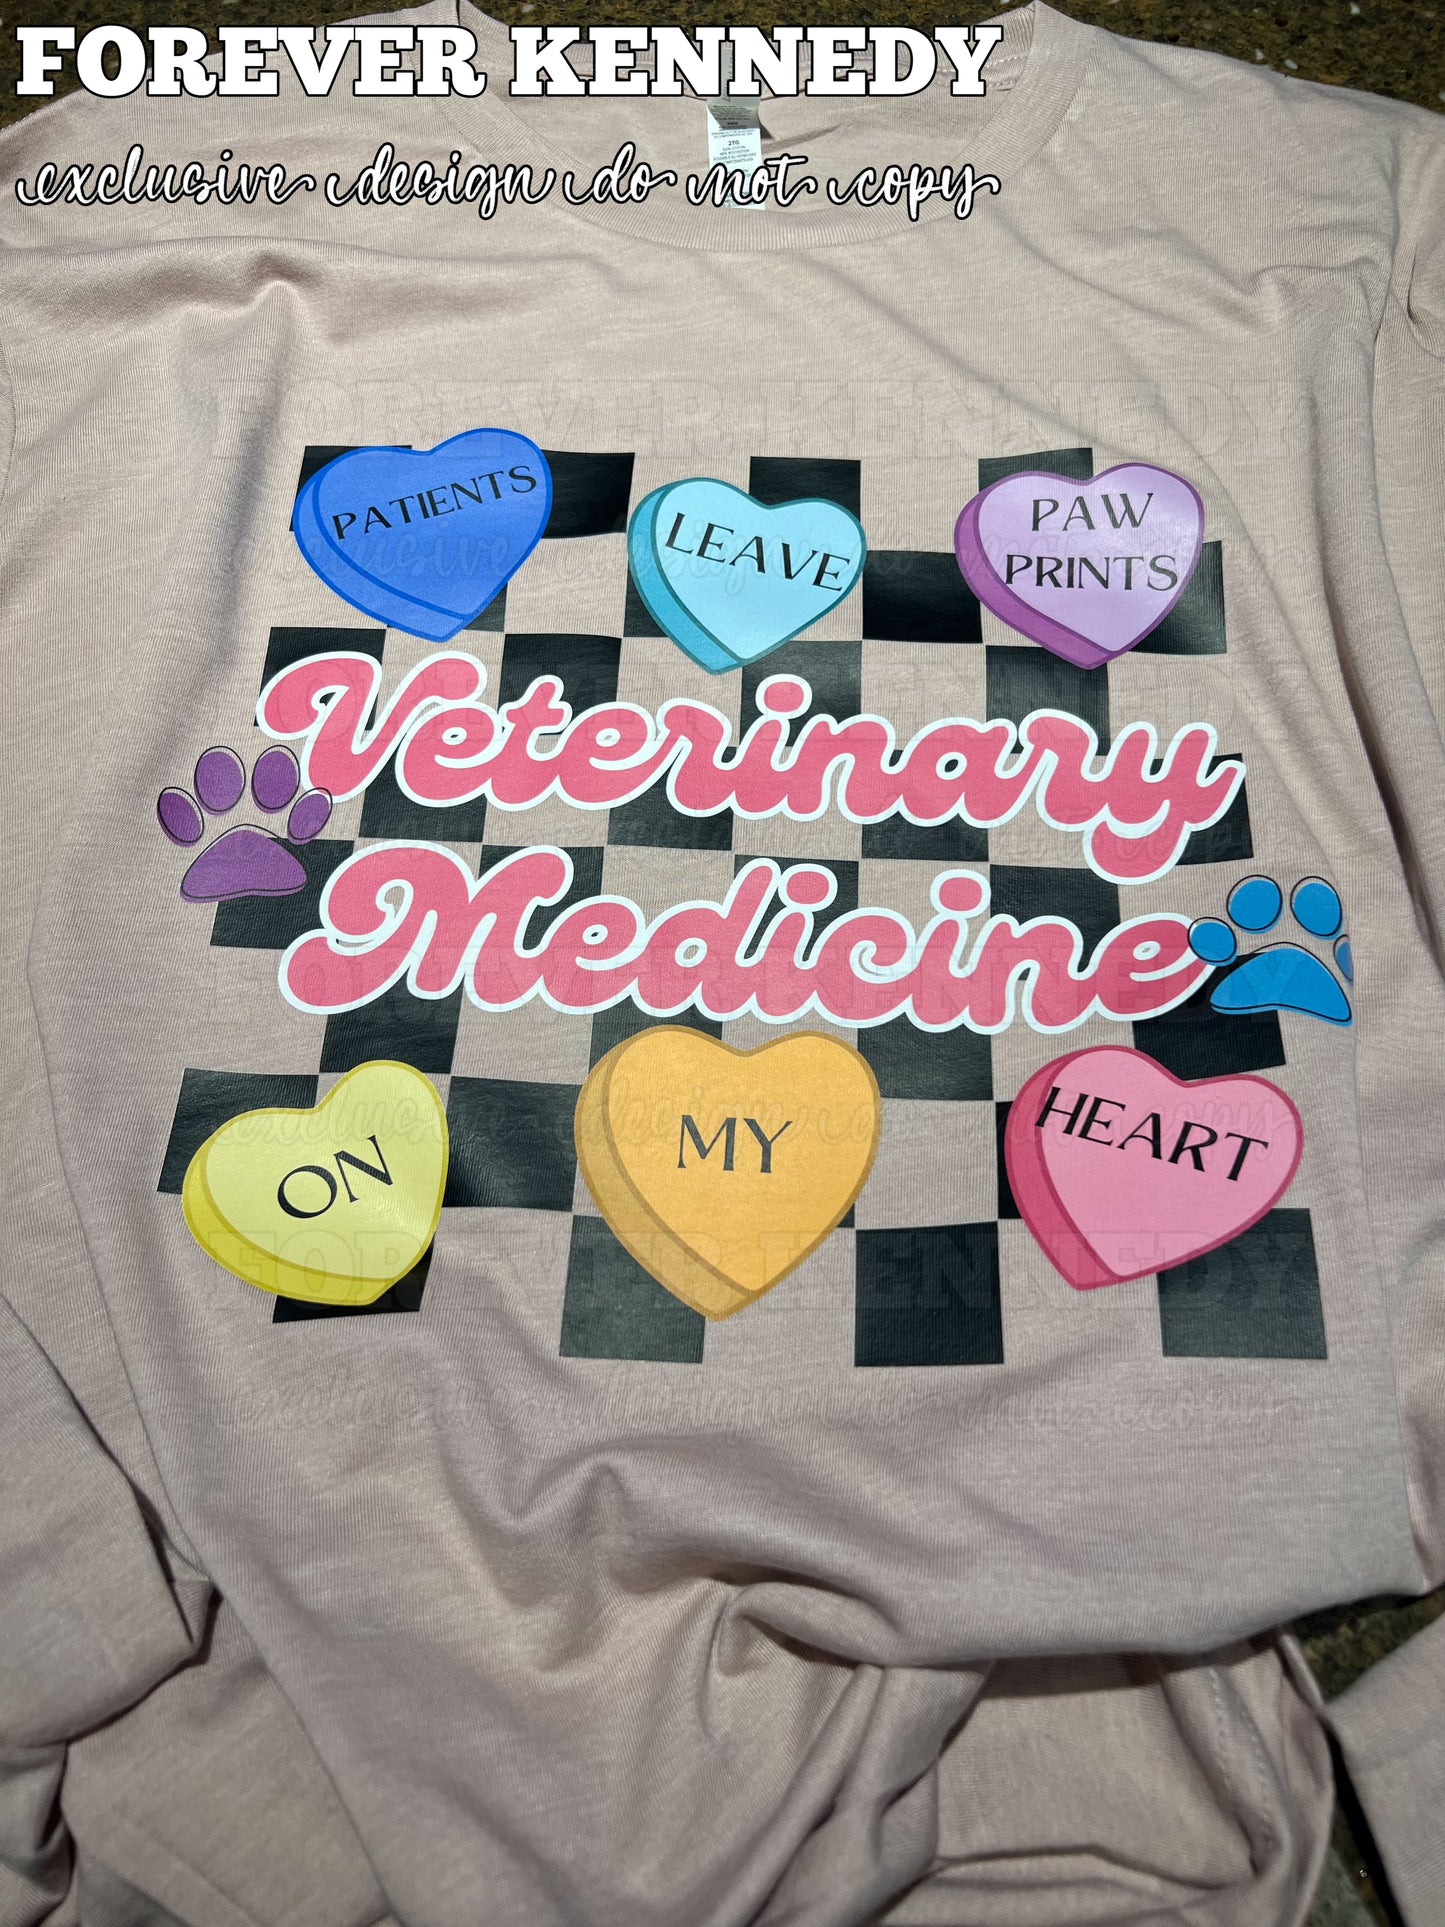 Made to Order (MTO) / Apparel: EXCLUSIVE Patients leave paw prints on my heart